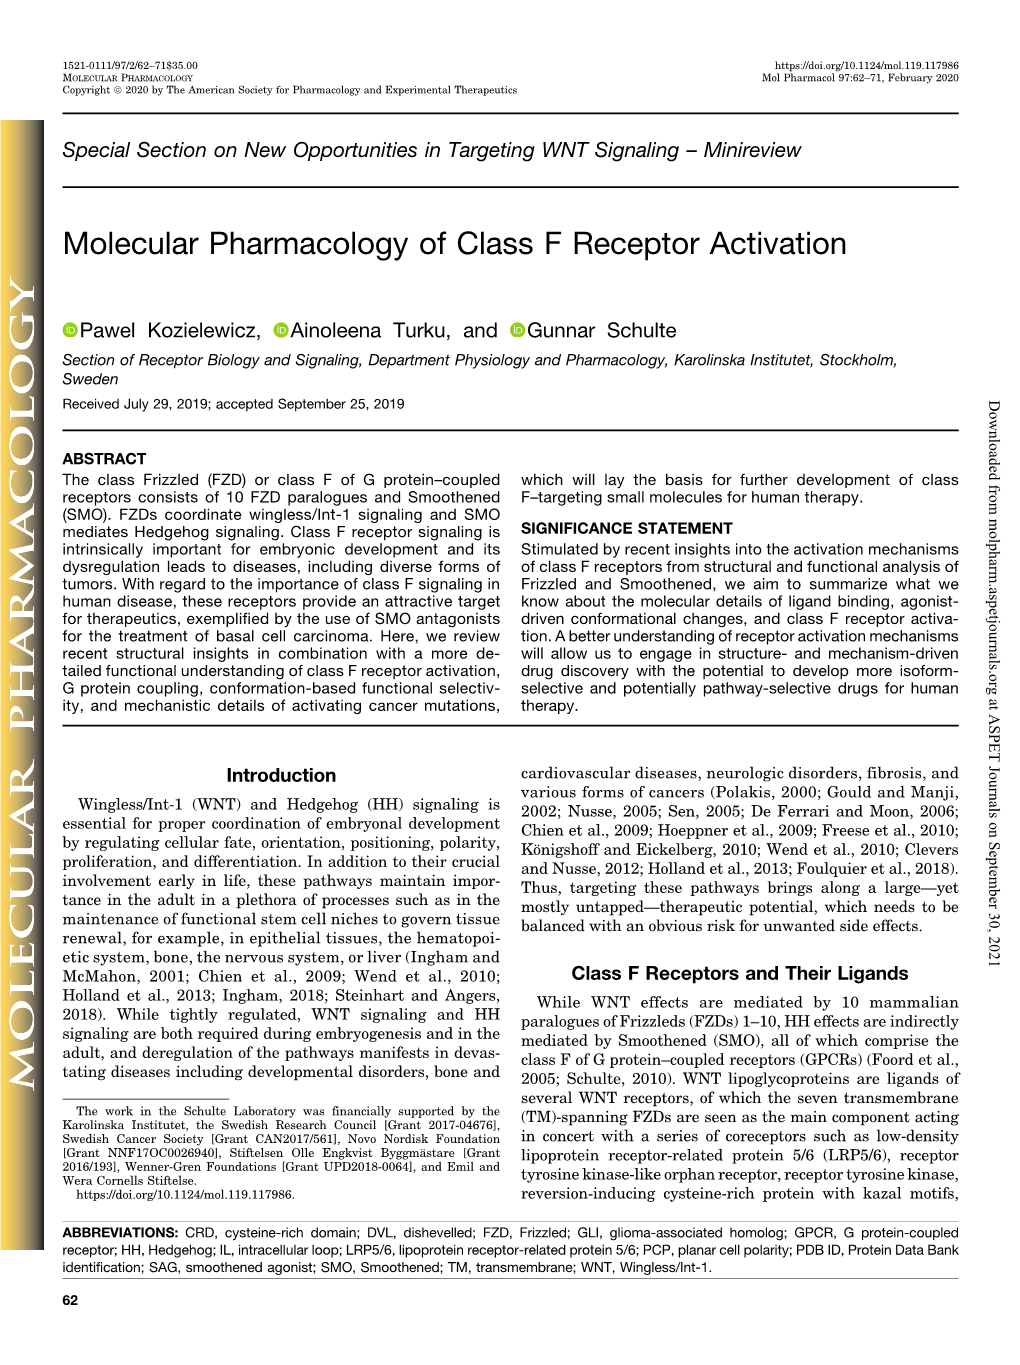 Molecular Pharmacology of Class F Receptor Activation